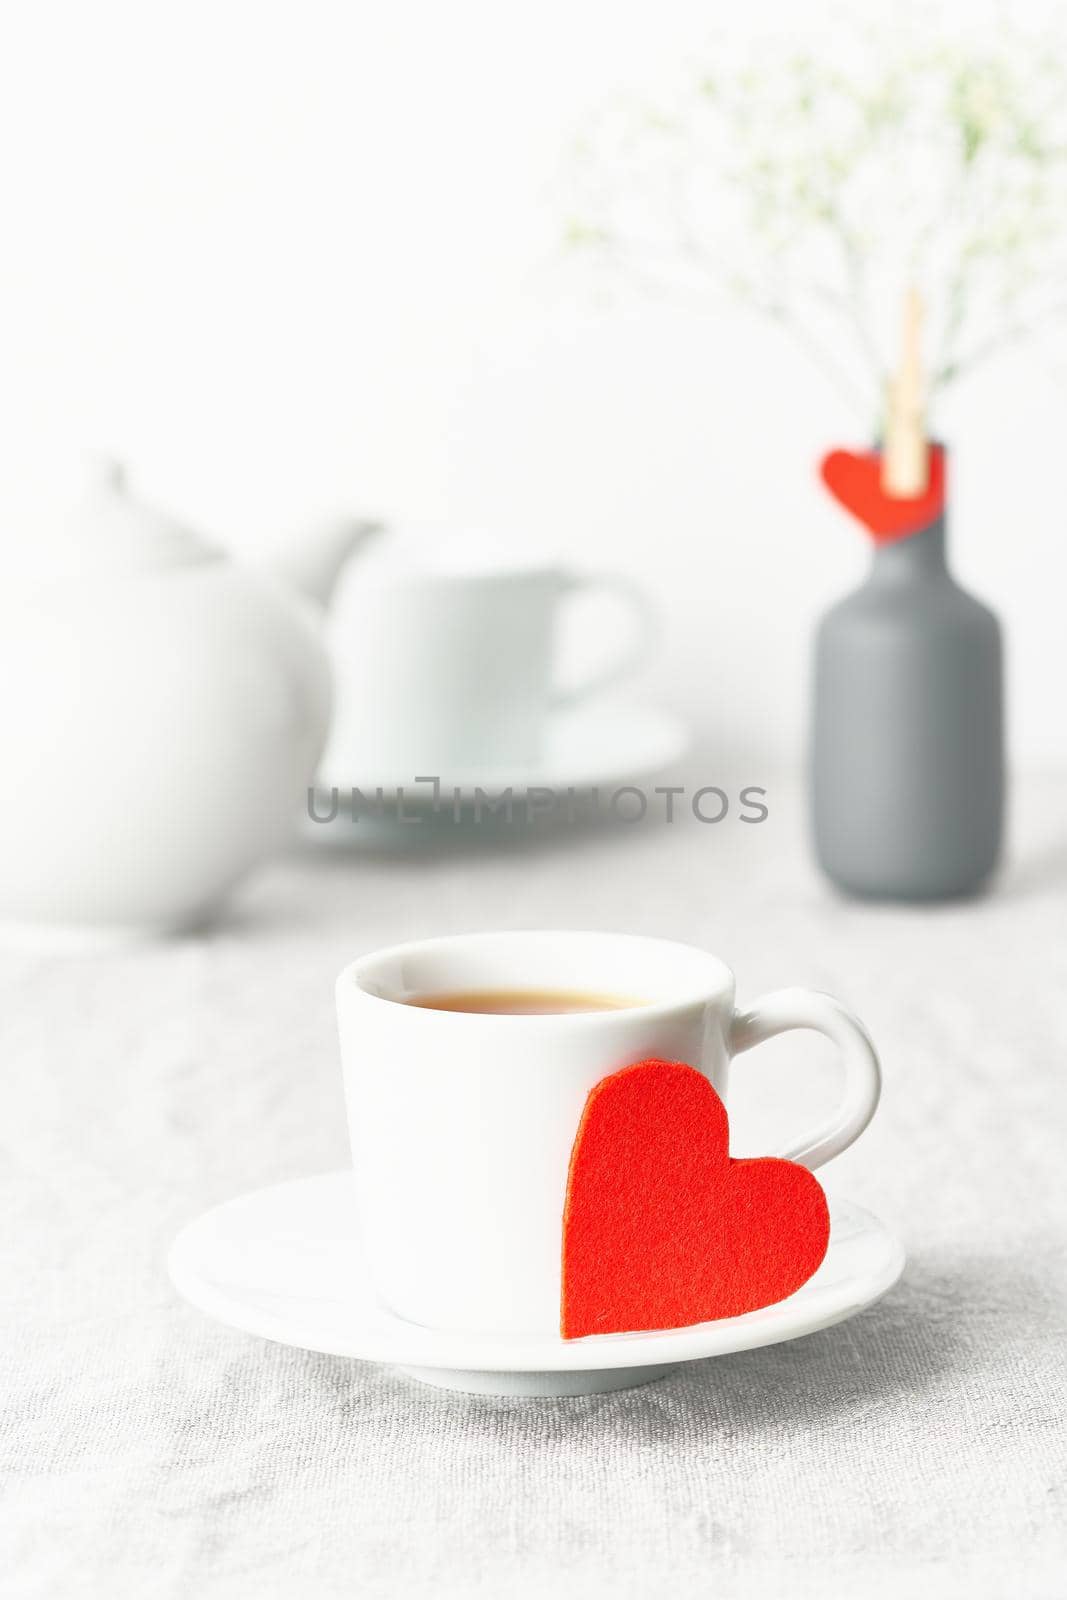 Valentine's Day. Morning breakfast for two with tea and flowers. Red felt heart is symbol of lovers by NataBene